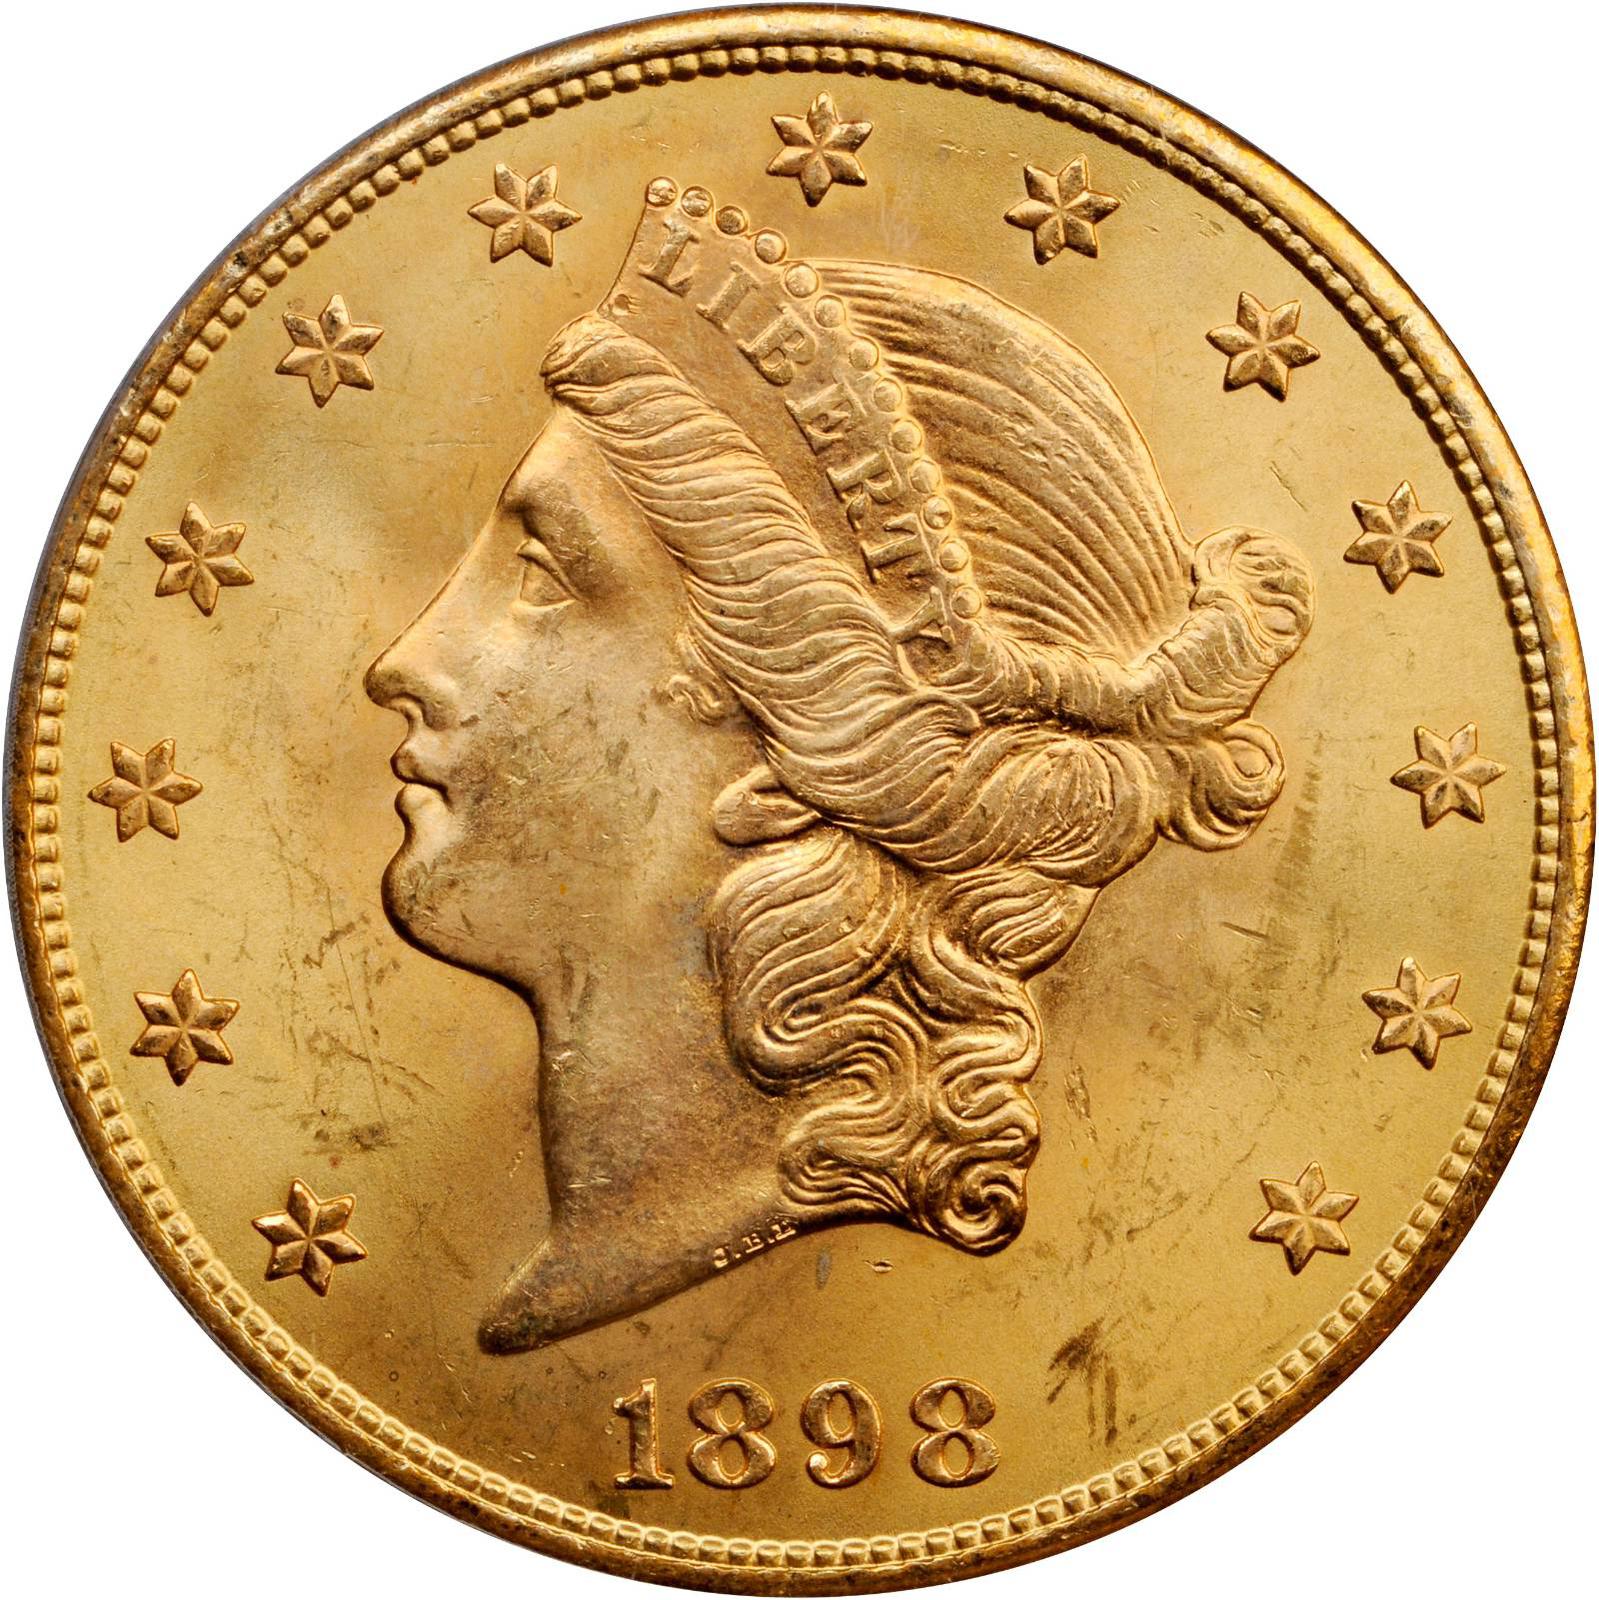 Value of 1898-S $20 Liberty Double Eagle | Sell Rare Coins